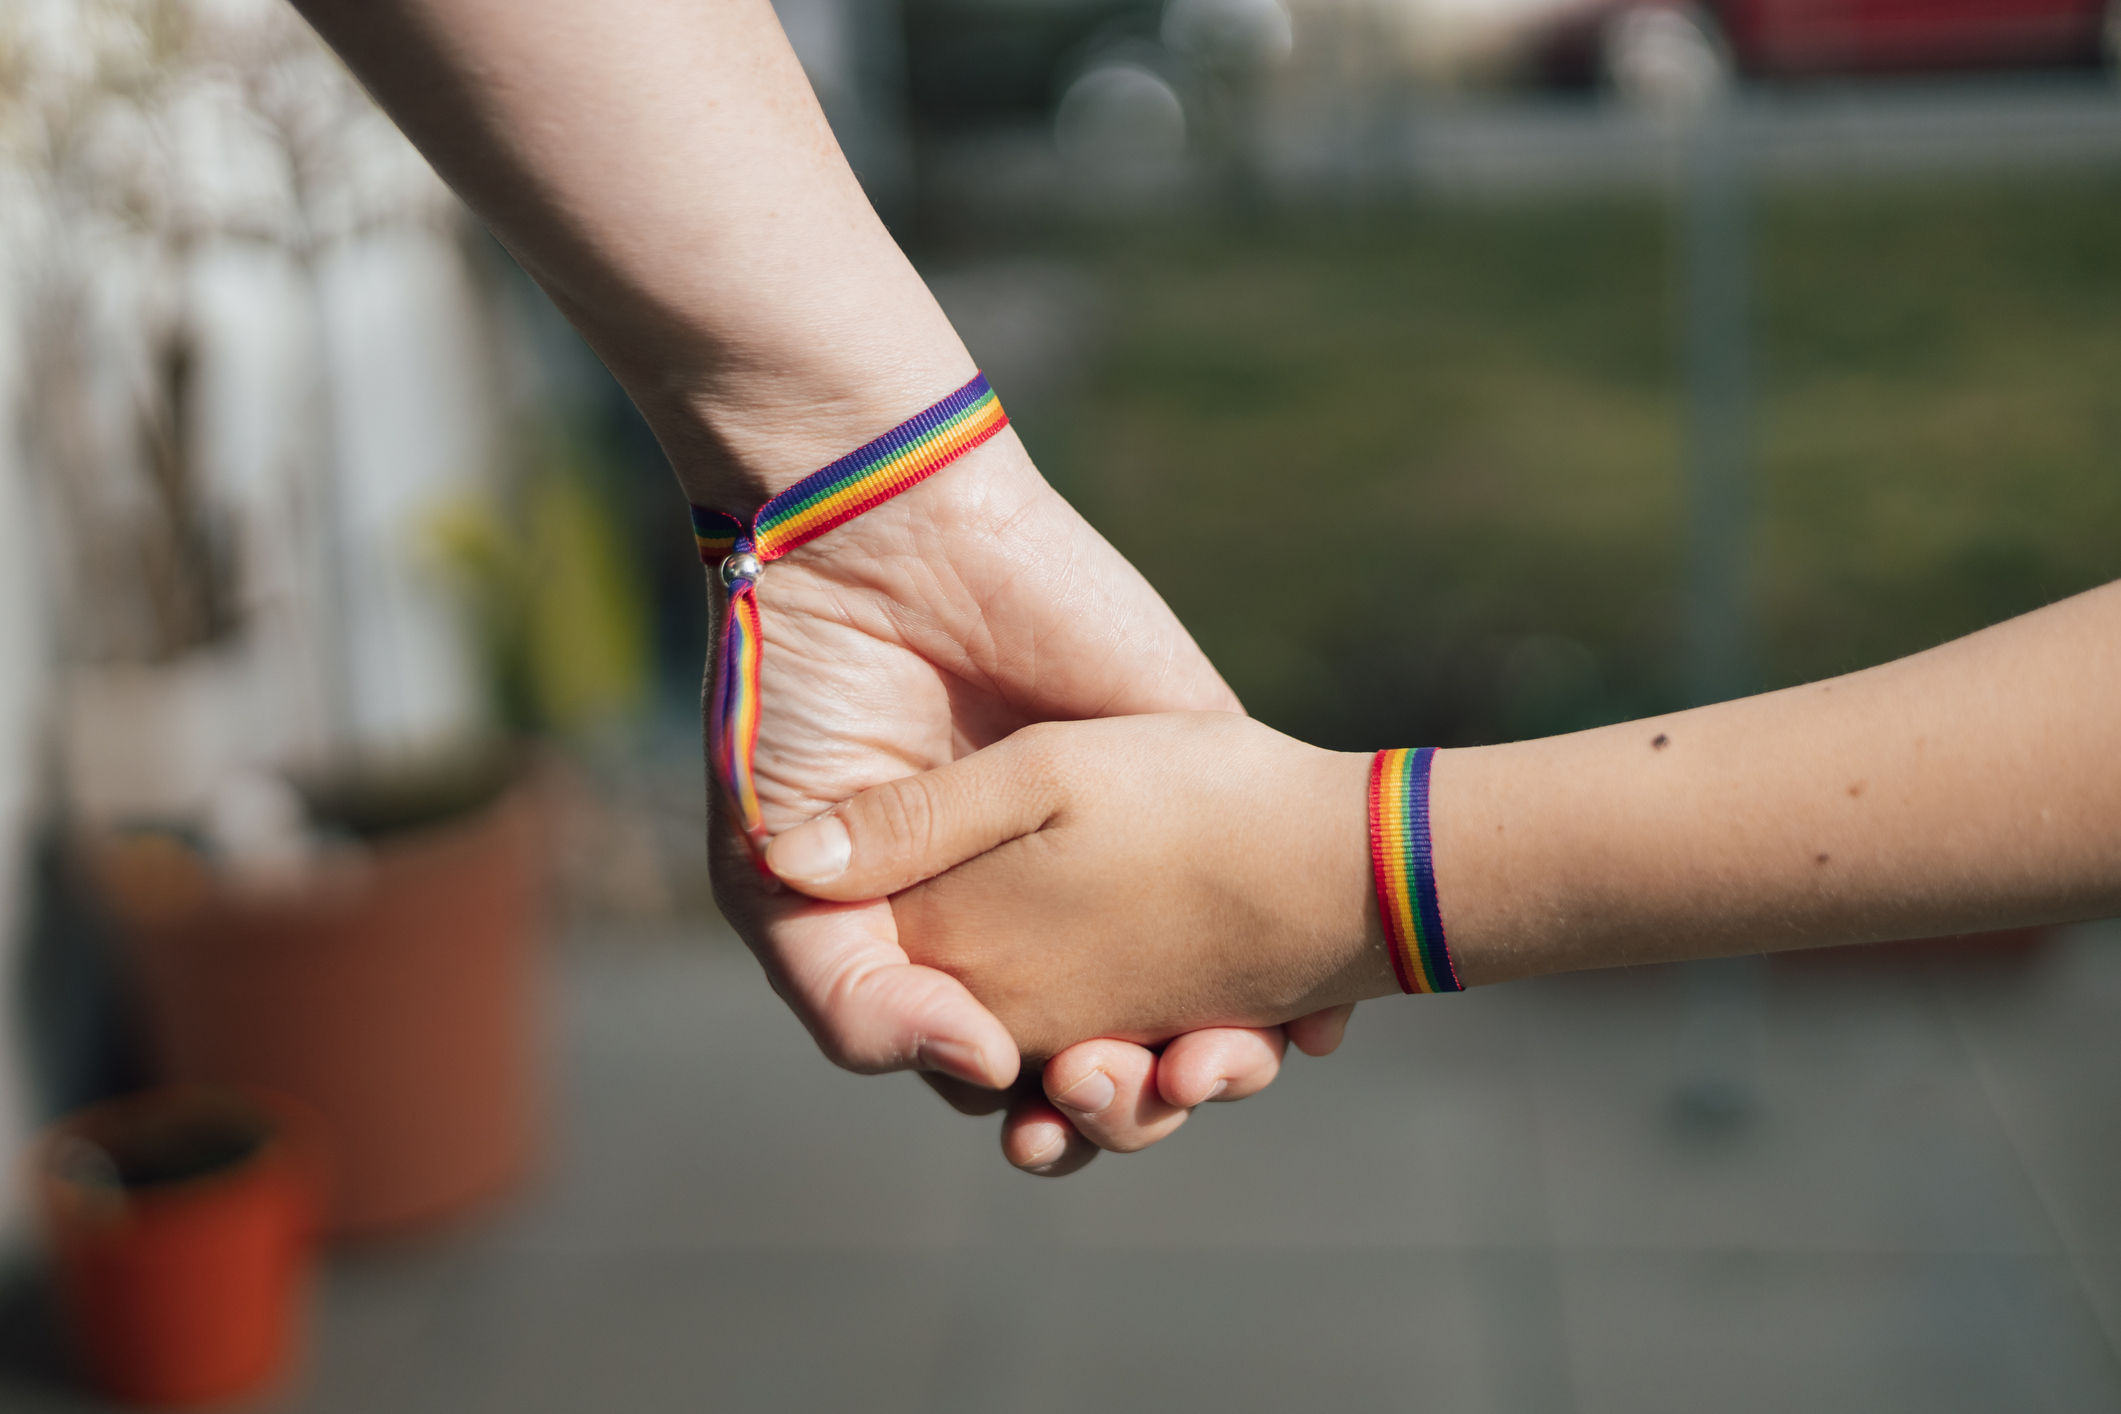 mother and daughter holding hands wearing rainbow bracelets